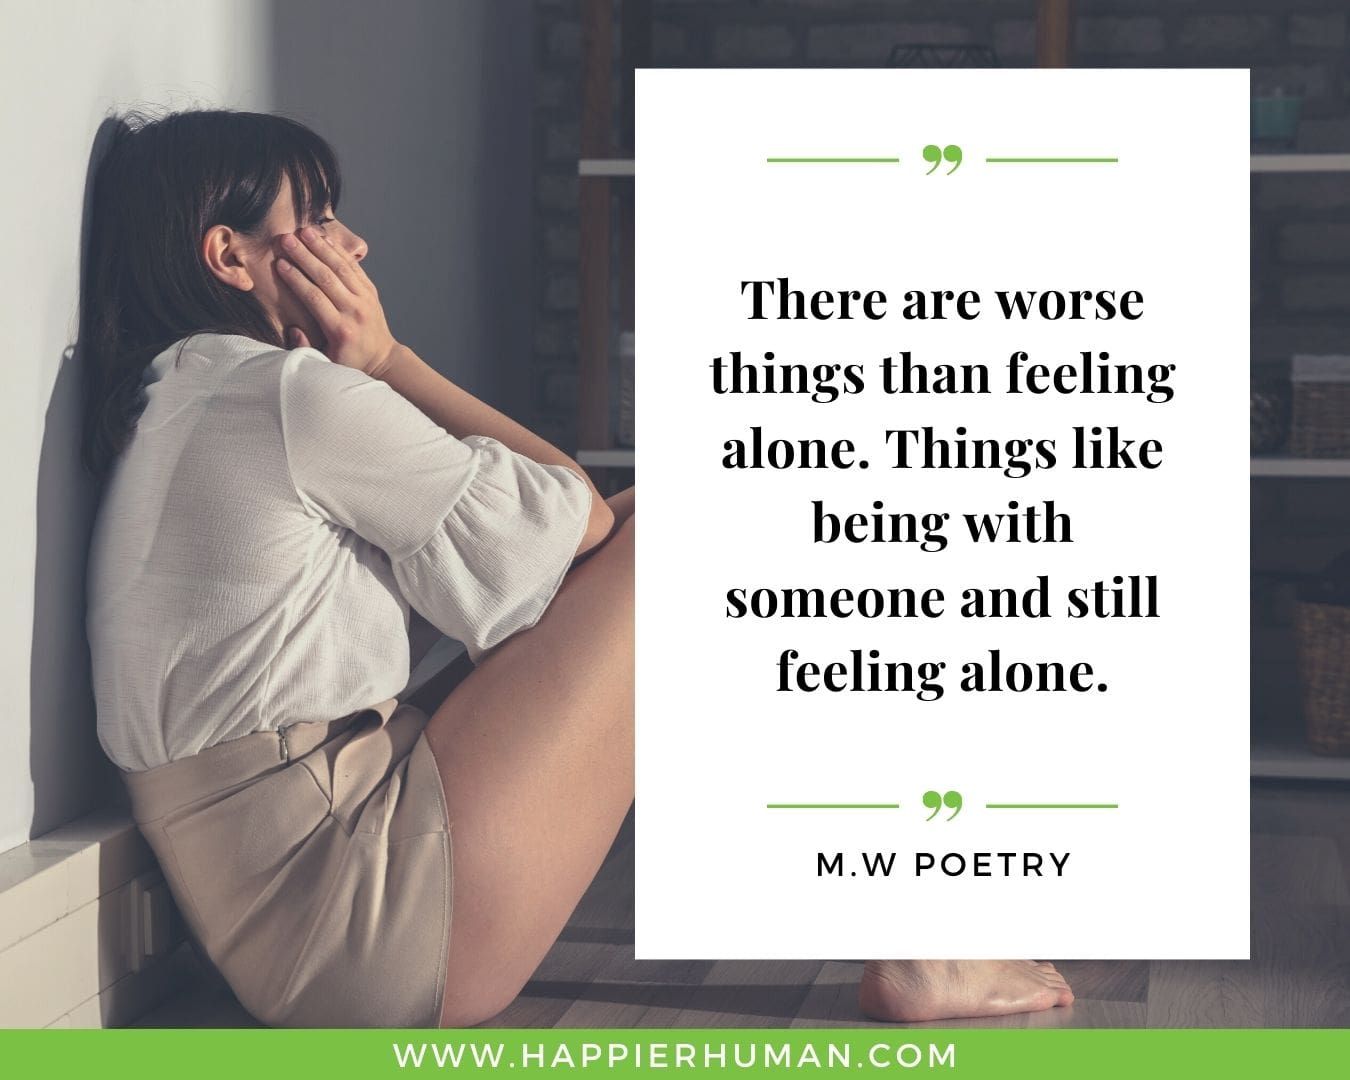 Loneliness Quotes - “There are worse things than feeling alone. Things like being with someone and still feeling alone.”– M.W Poetry